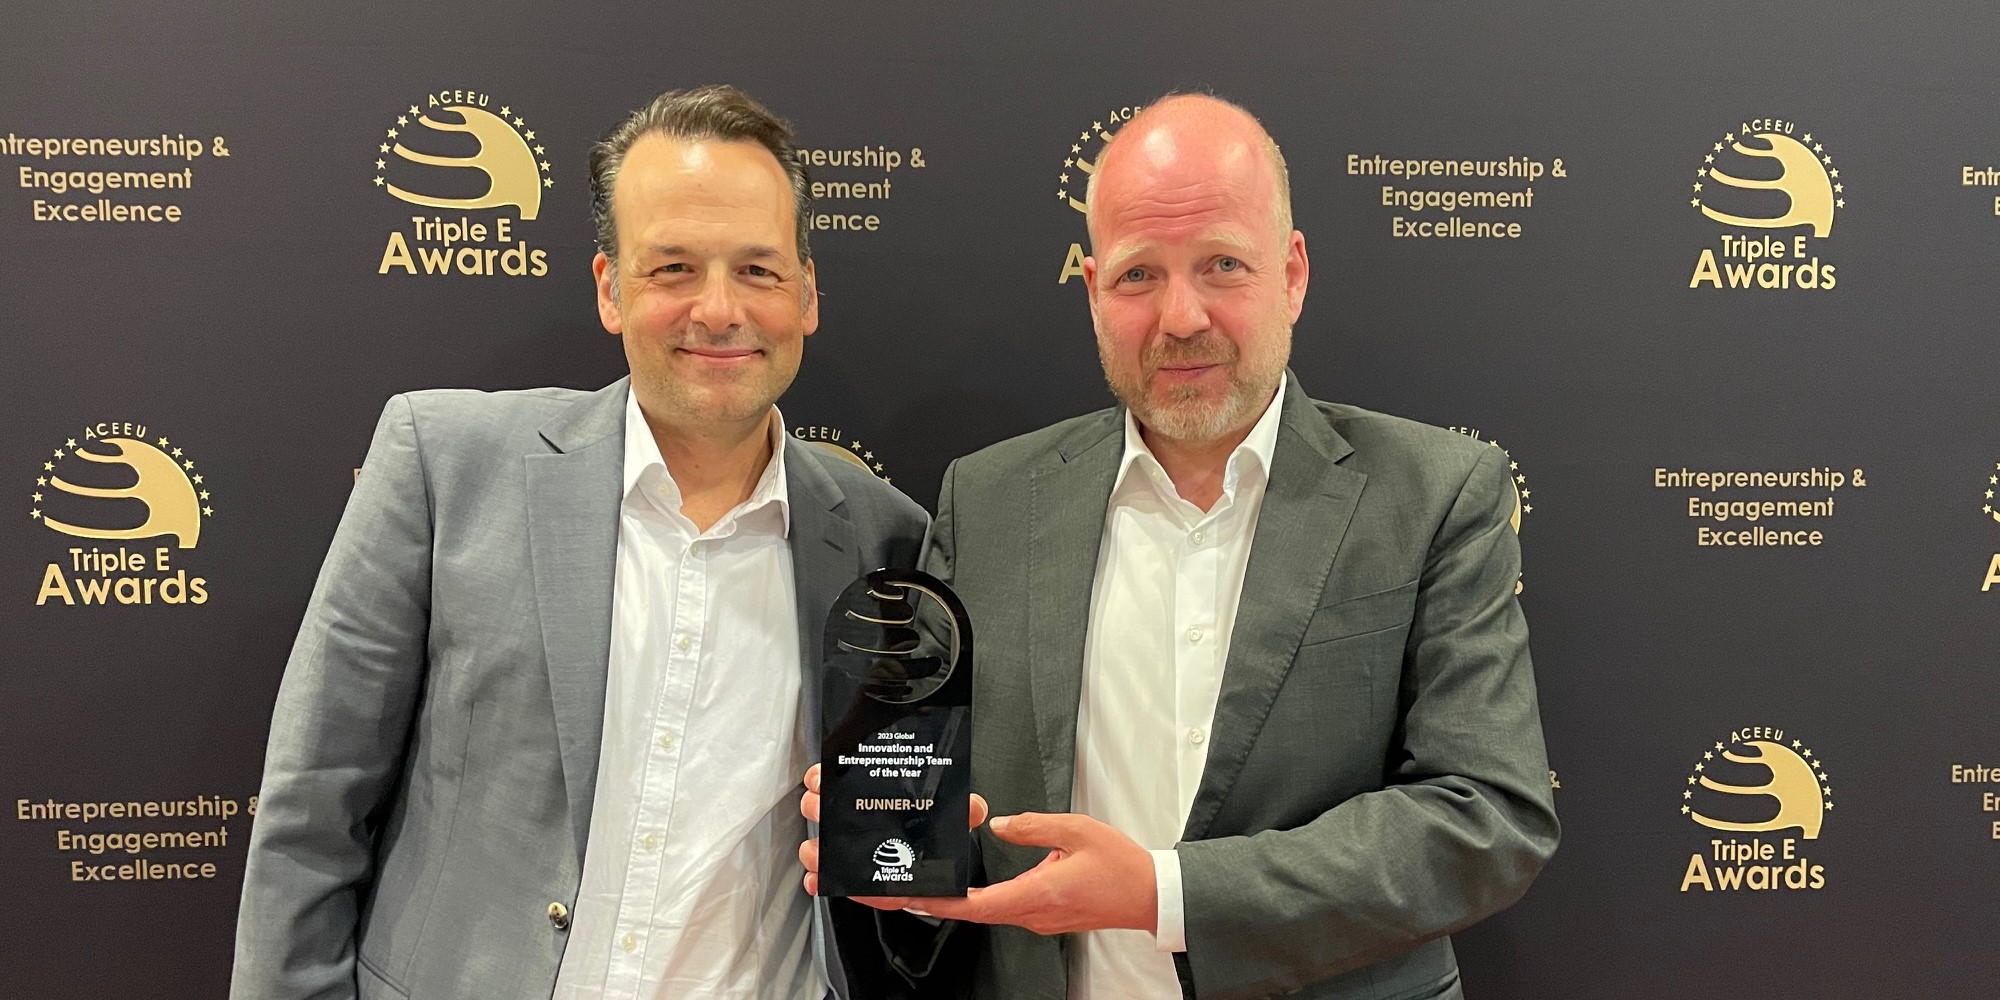 Roland Haring (Ars Electronica Futurelab) & Klaus Engel (Siemens Healthineers) accepted the Triple E Award in Barcelona.